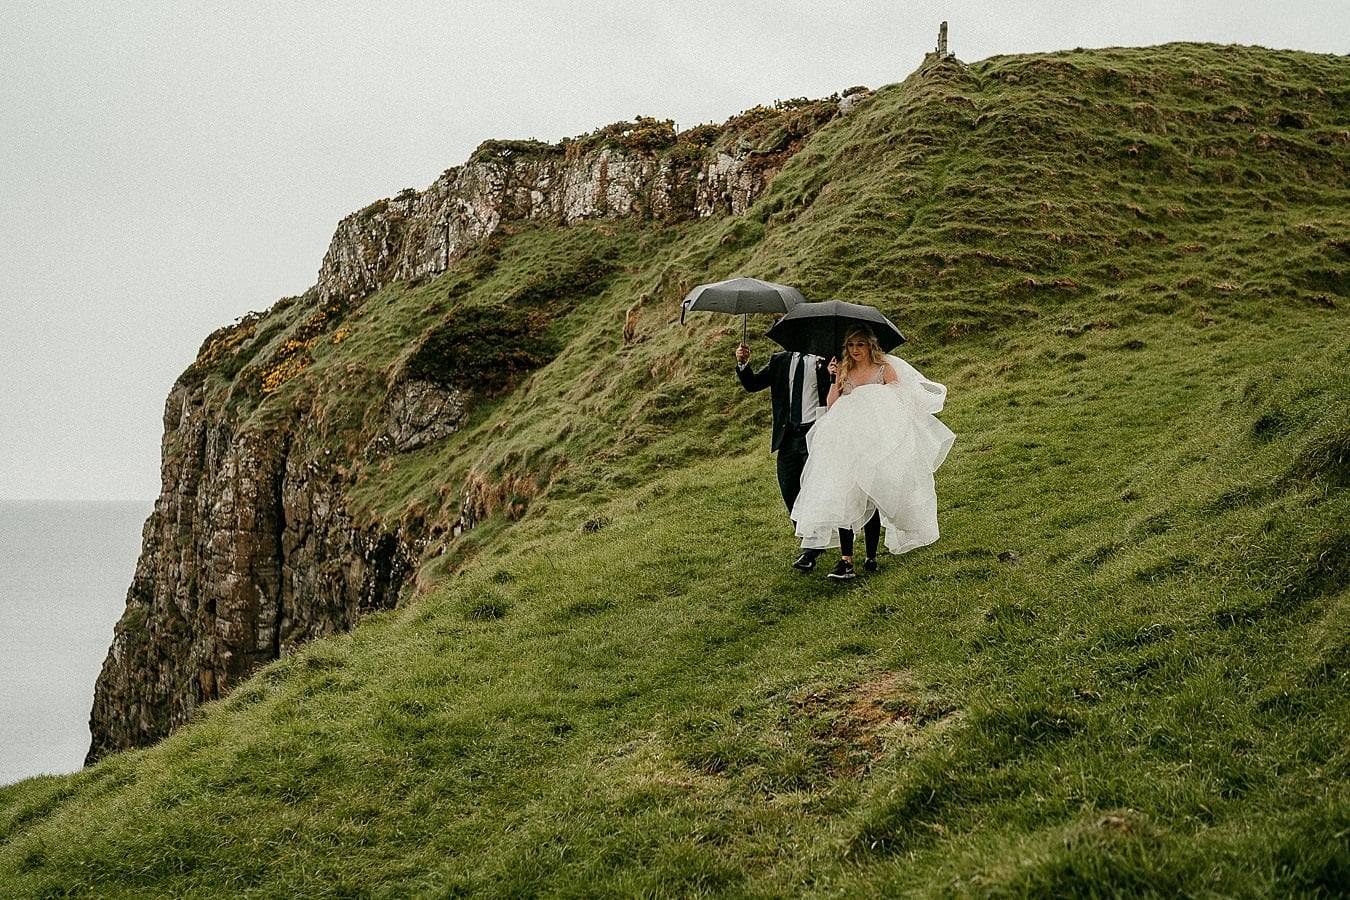 Winter elopement - A bride wearing leggings on her wedding day to keep warm